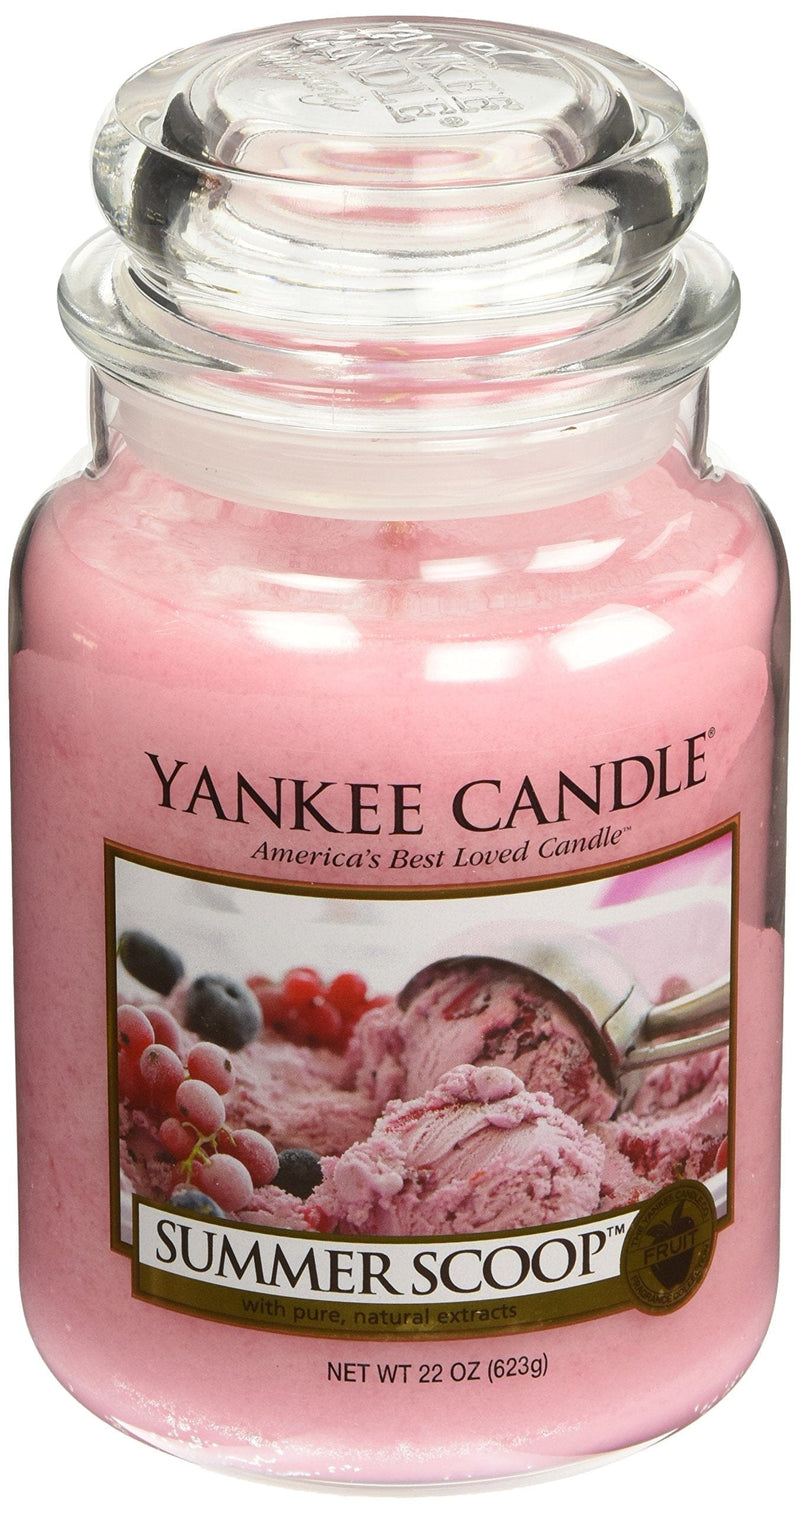 Yankee Candle Original Jar Candle - Summer Scoop Large - Shelburne Country Store